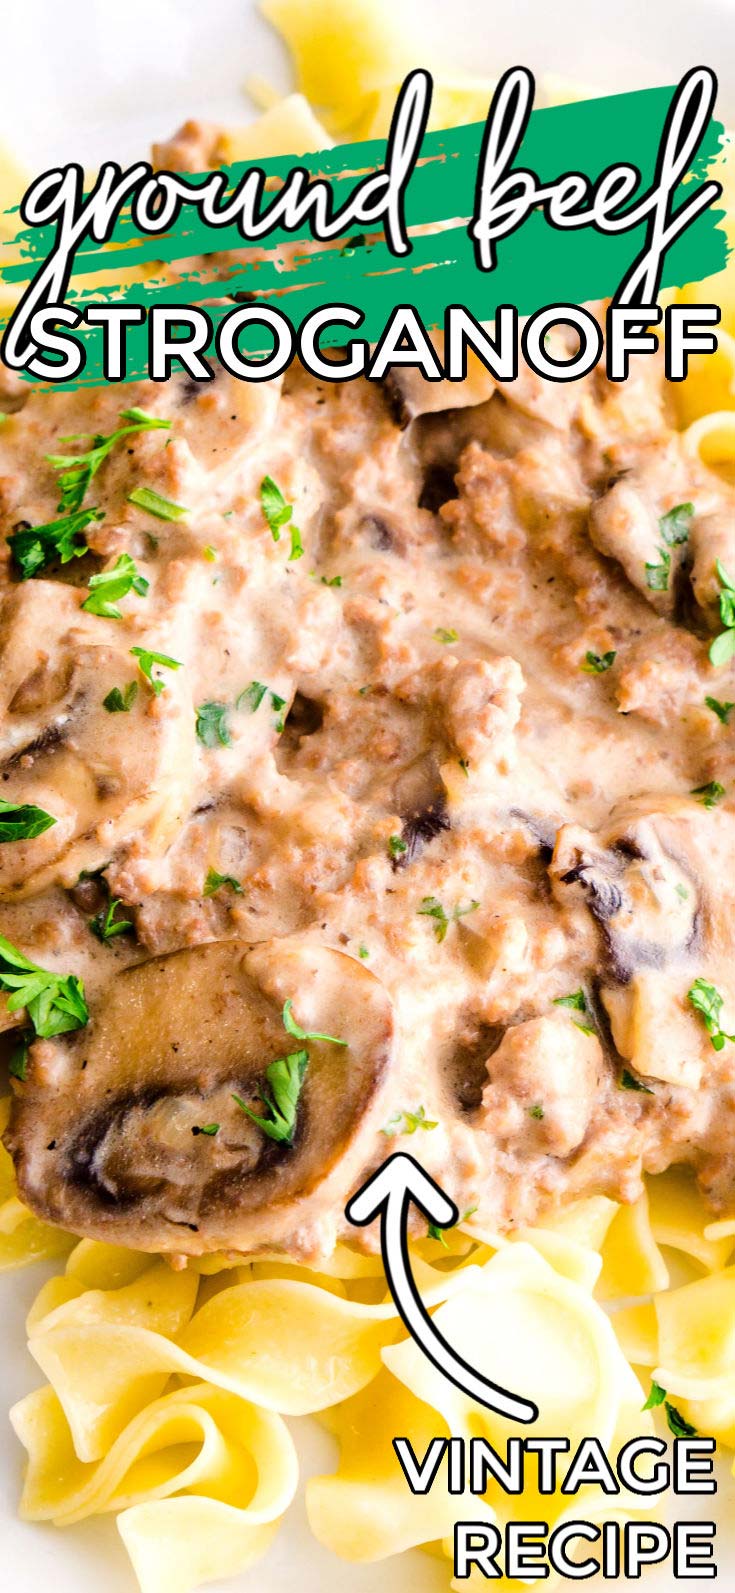 This Ground Beef Stroganoff recipe is some serious comfort food and ready in just 30 minutes. It serves 6 and costs $15.16 to make. That’s just $2.53 per serving!  via @foodfolksandfun